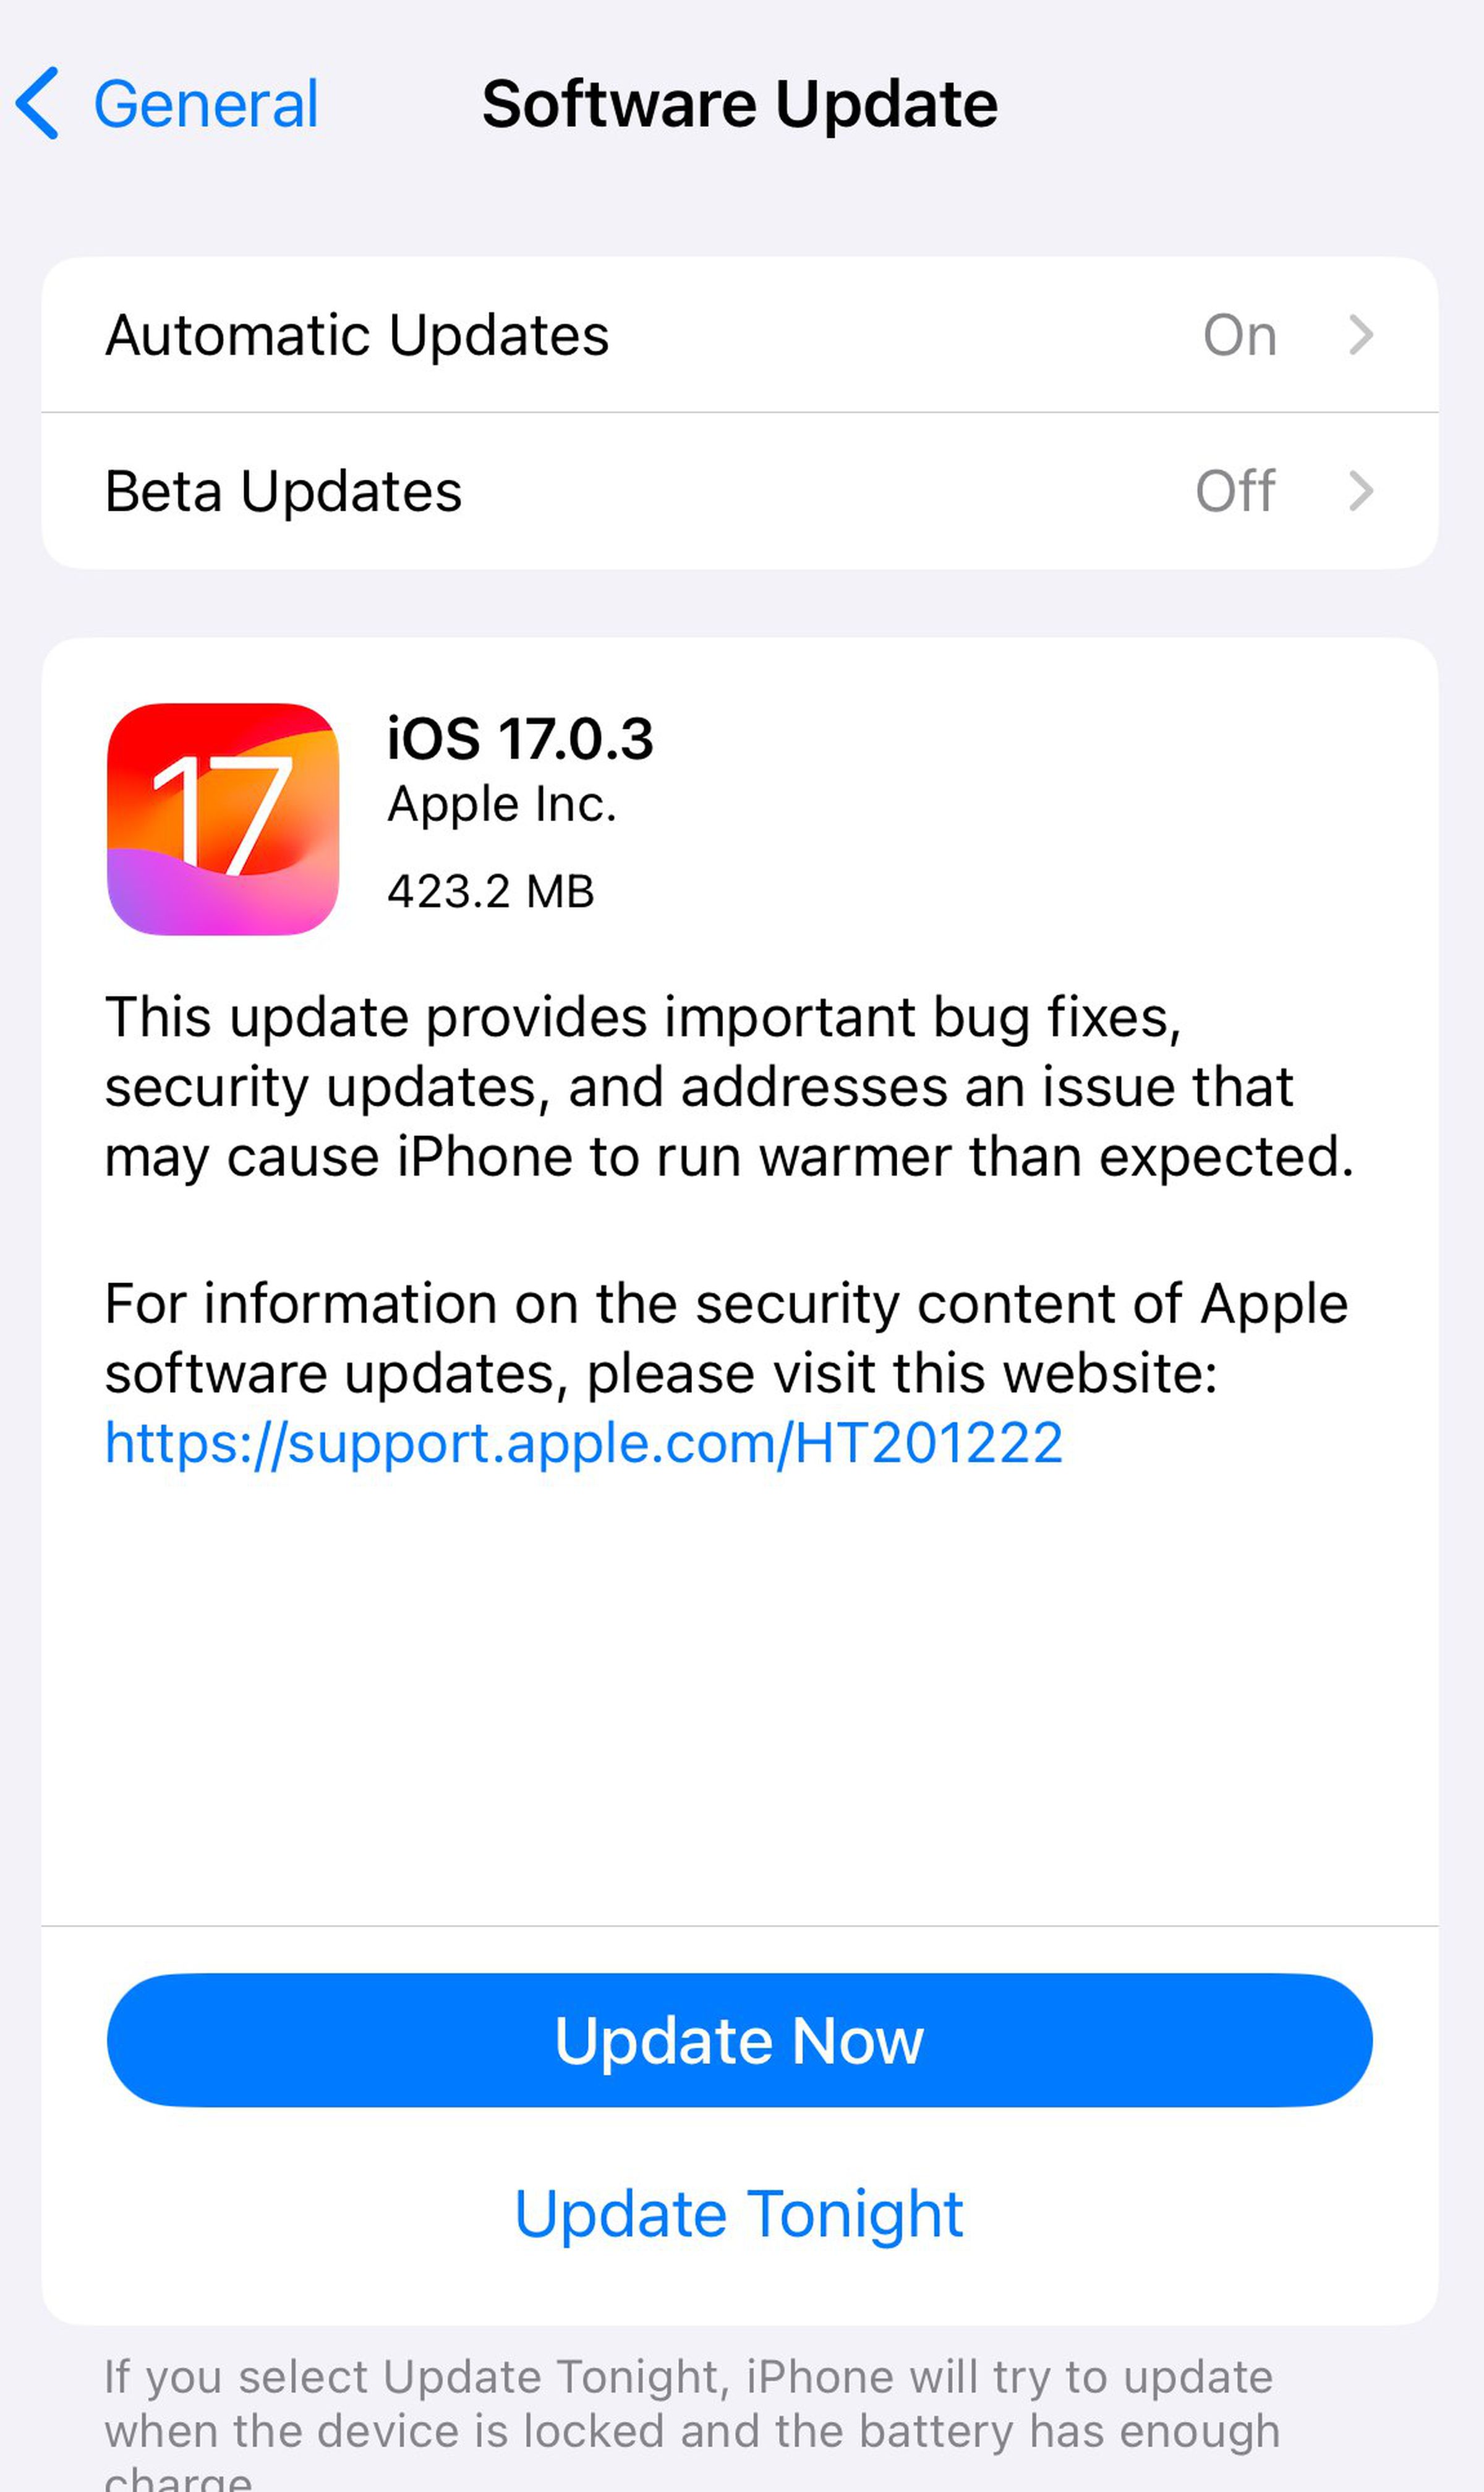 iPhone screenshot showing the details of the iOS 17.0.3 update.